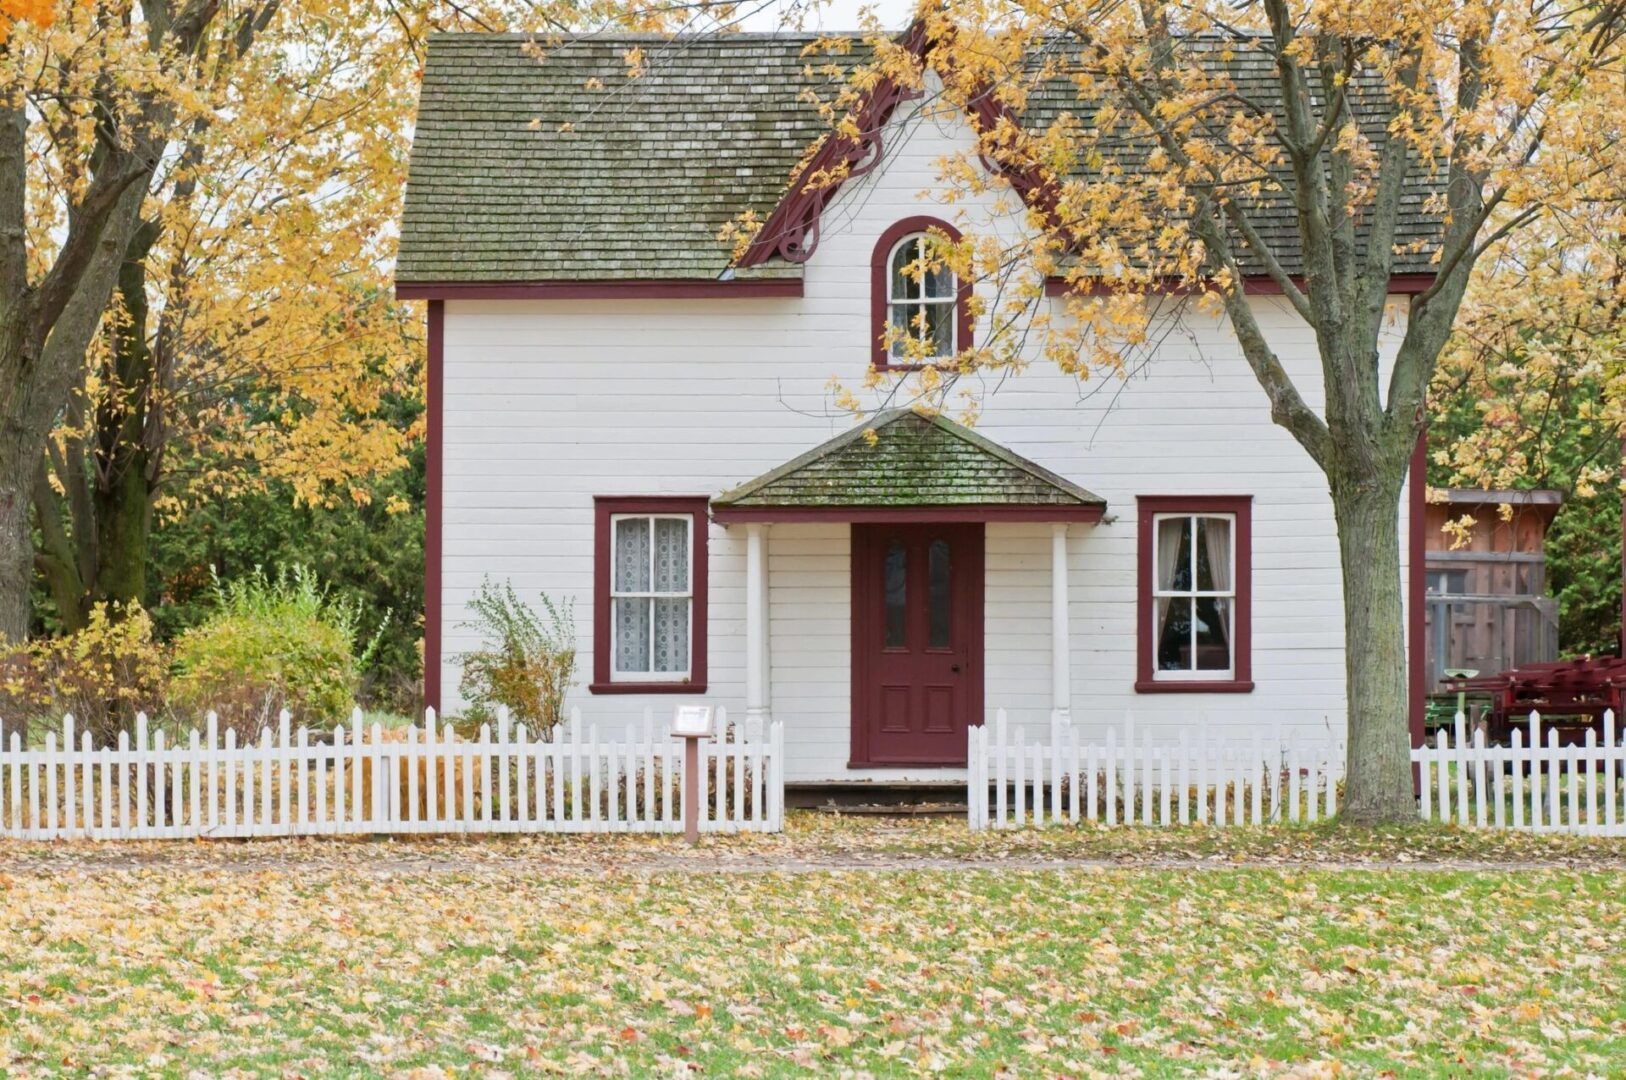 A Small White Color House in the Middle of Autumn Trees